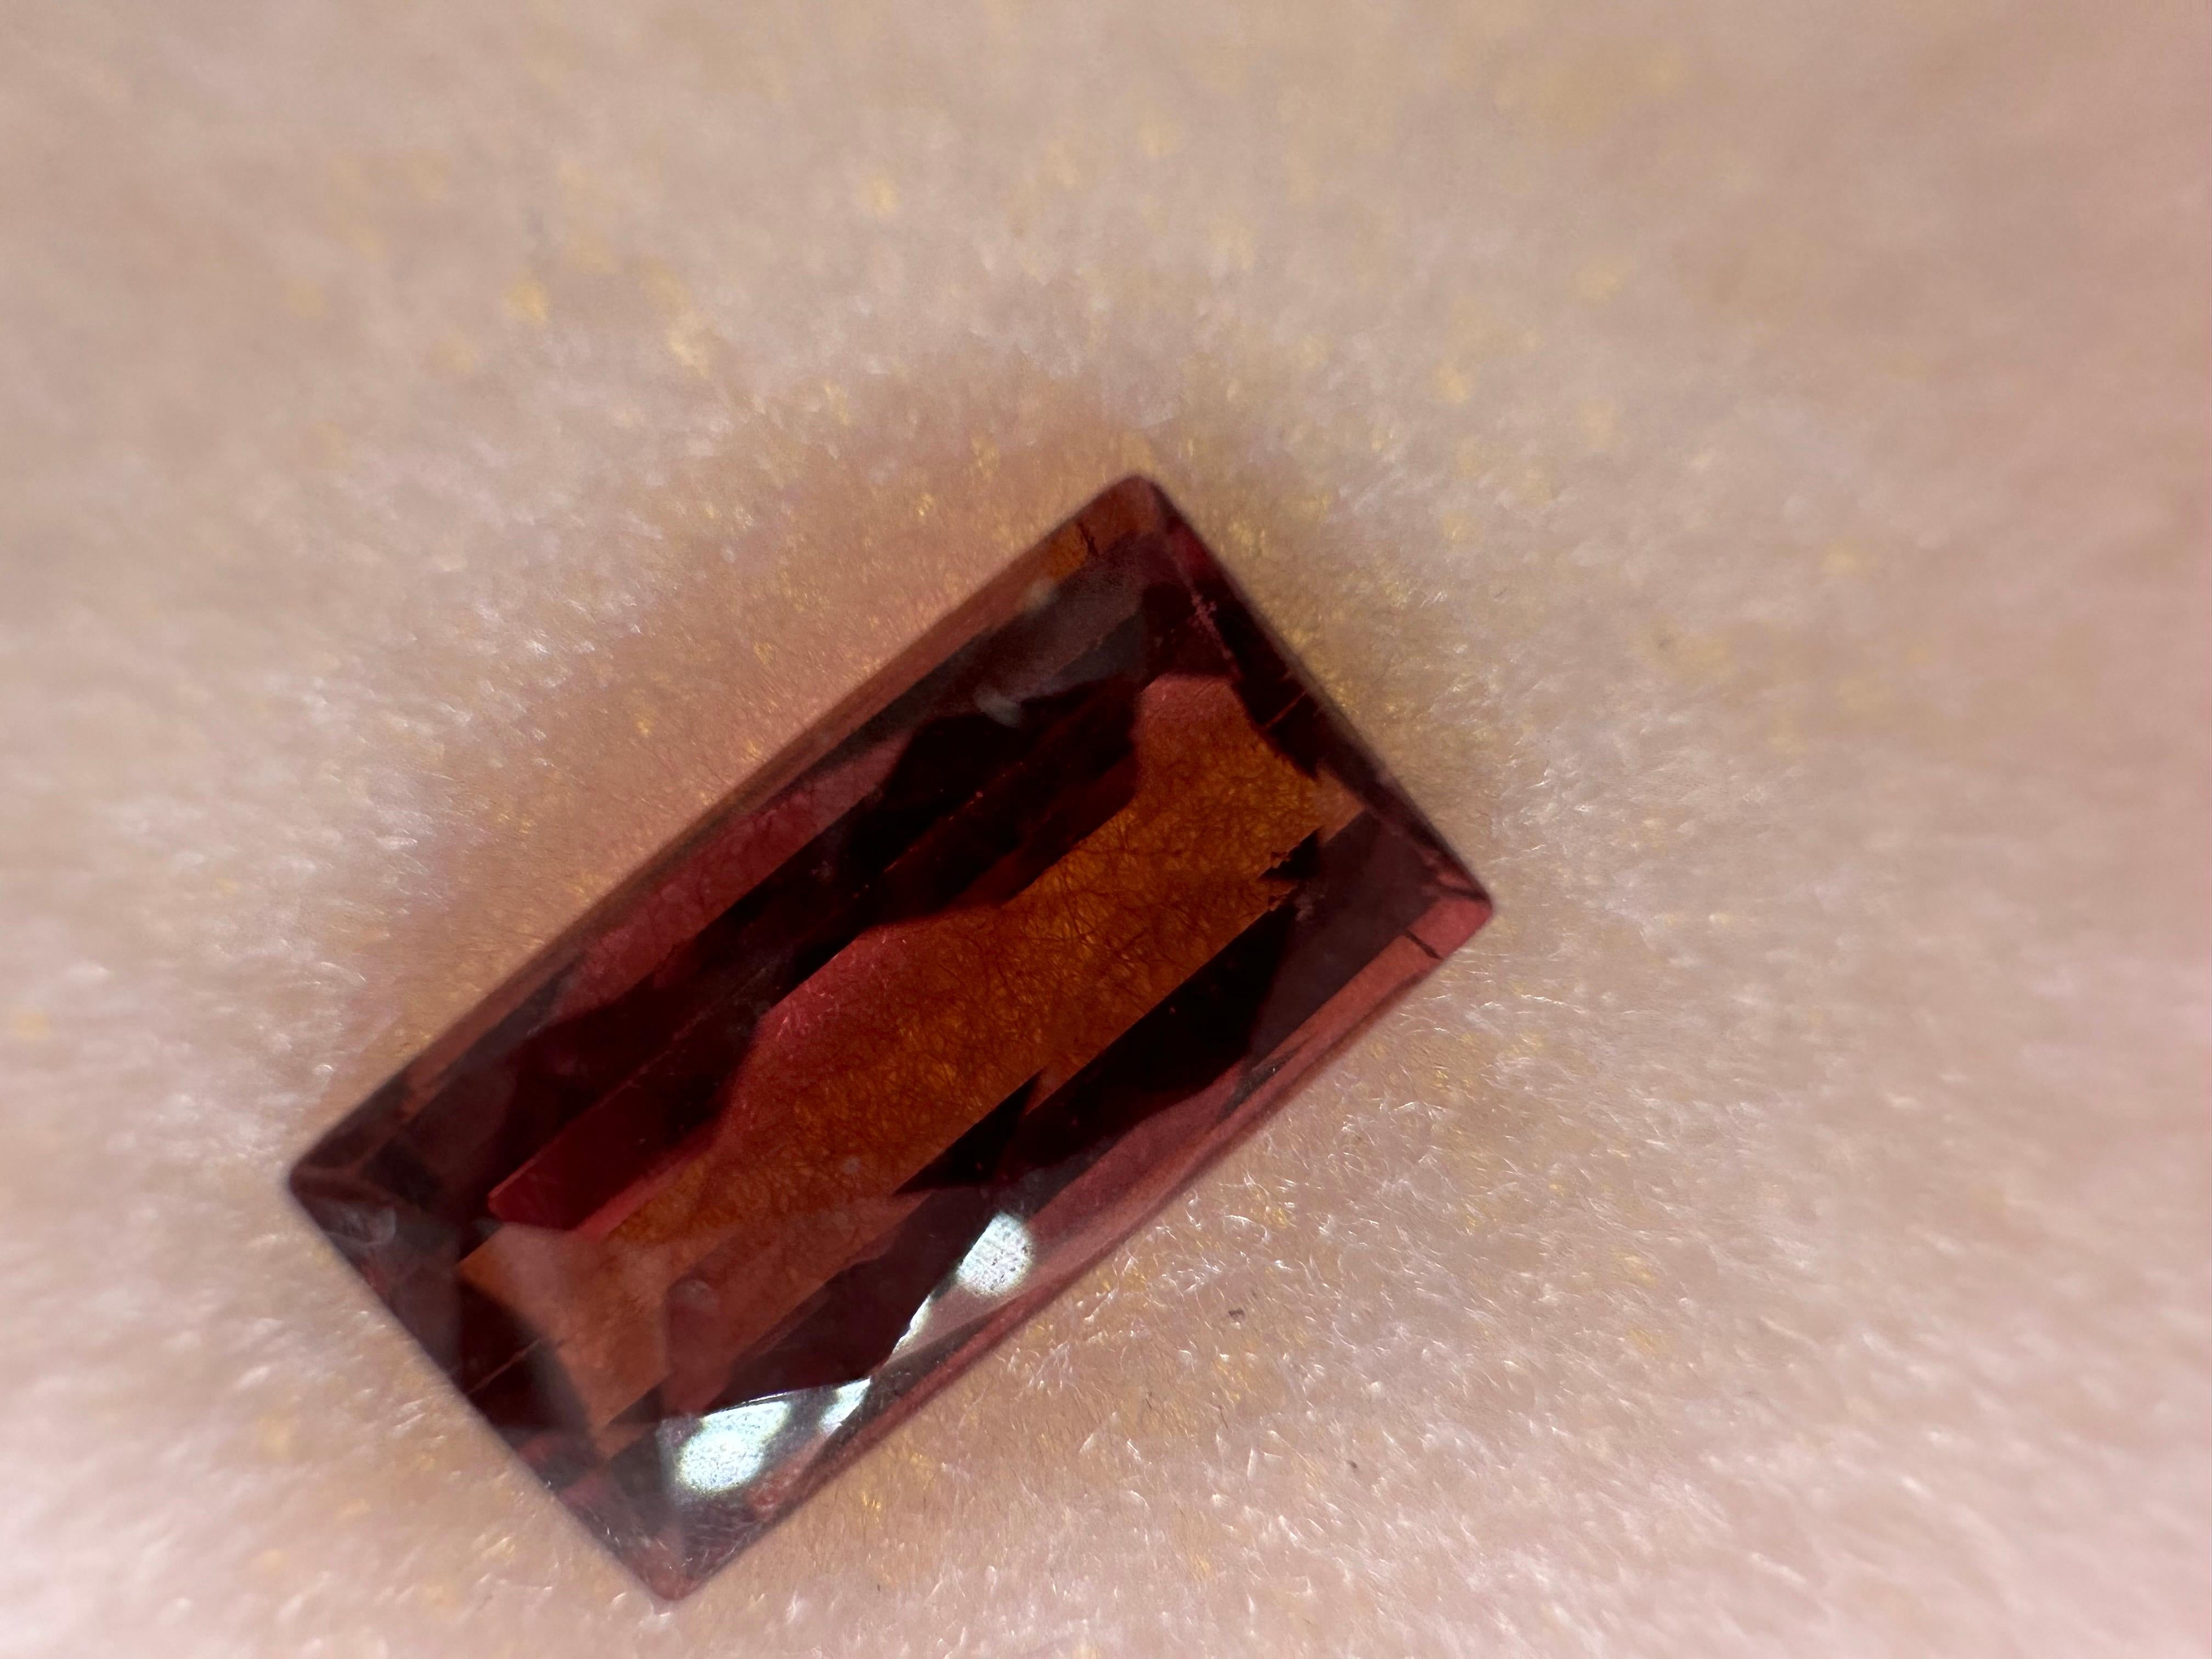 Pink tourmaline, beautiful and will come with a certificate of authenticity.

NATURAL GEMSTONE(S): Pink Tourmaline
Clarity/Color: Slightly Included/Pink
Cut: Rectangular
Treatment: none


WHAT YOU GET AT STAMPAR JEWELERS:
Stampar Jewelers, located